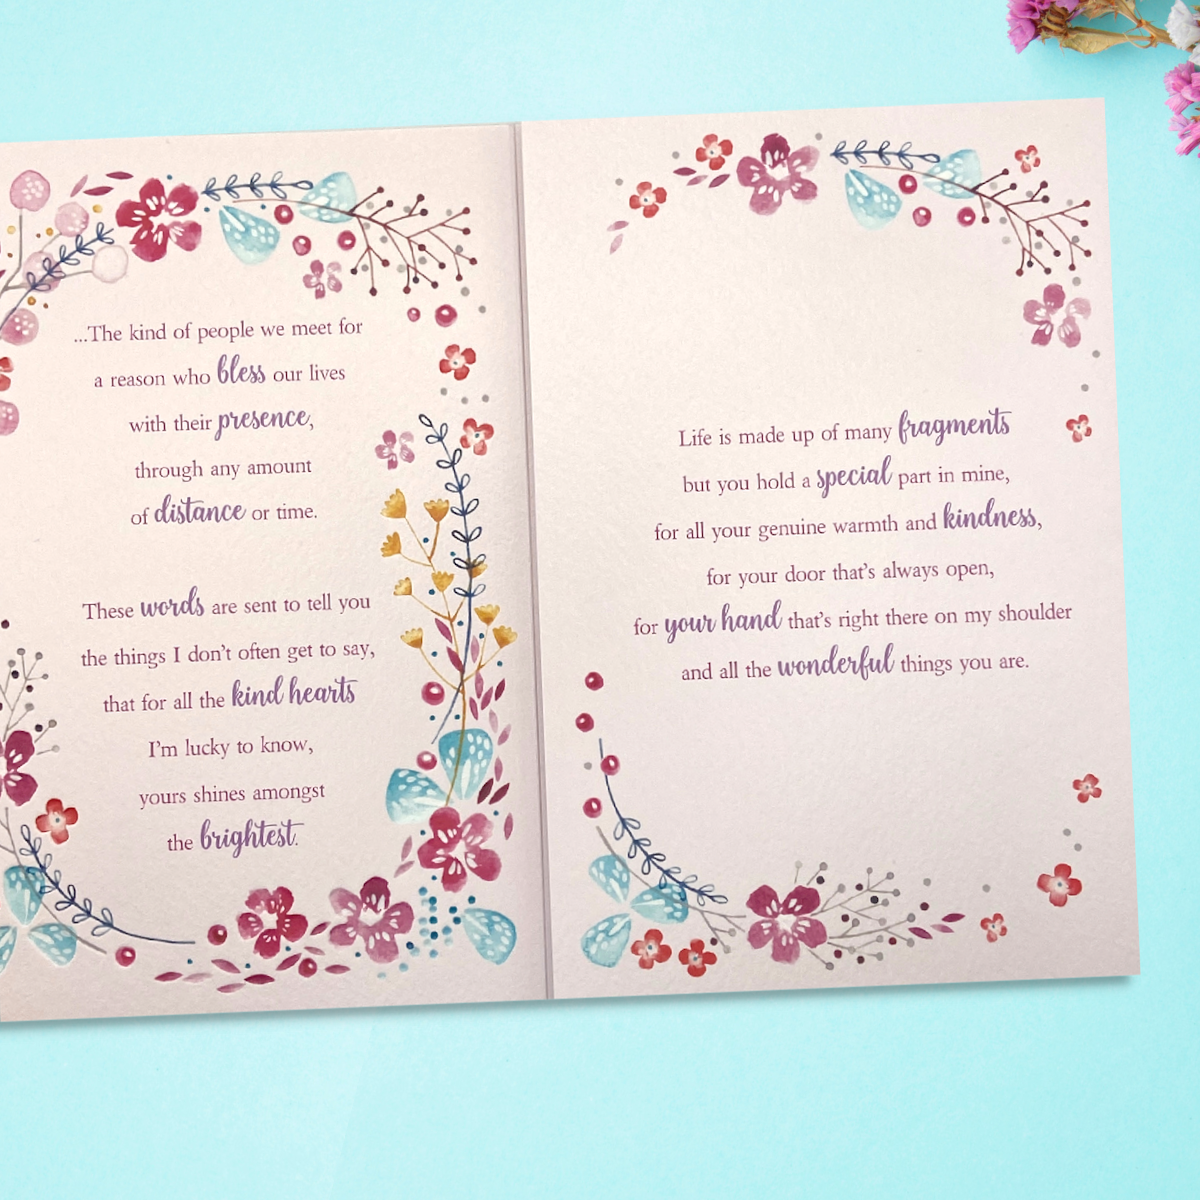 Two inside images with heartfelt verse and floral border